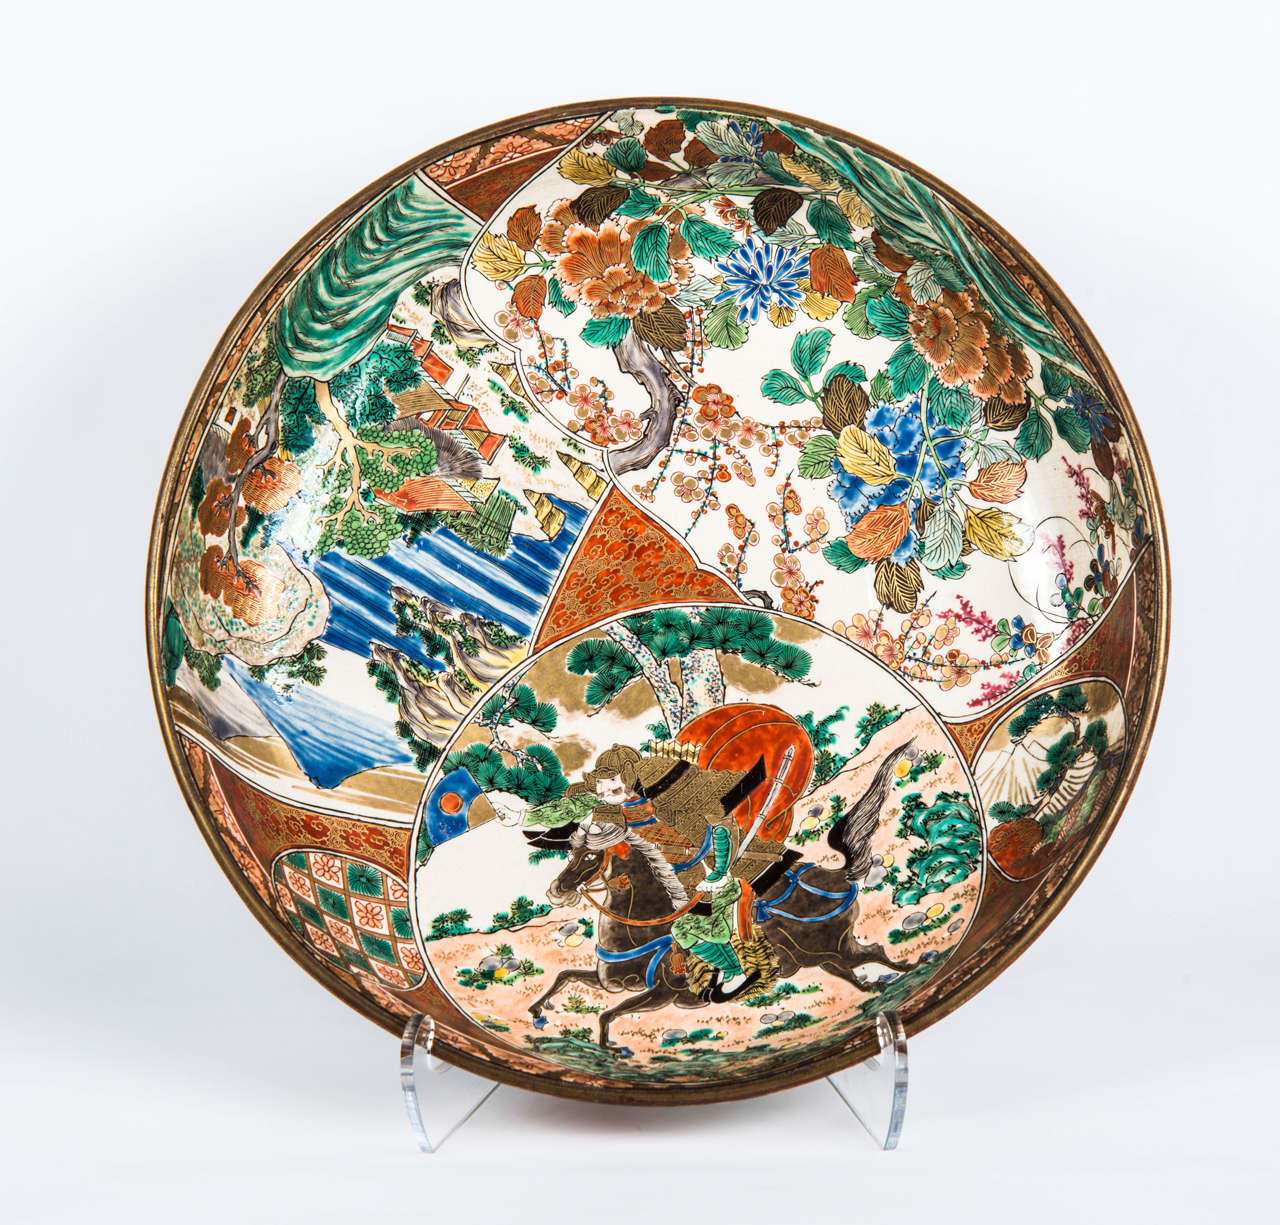 Very large polychrome porcelain dish with horse riding samurai scenery, village in a mountainous landscape and flowering branches.
Branches and flowers decor on the back.
This dish bears the mark of the Kutani Manufacture.